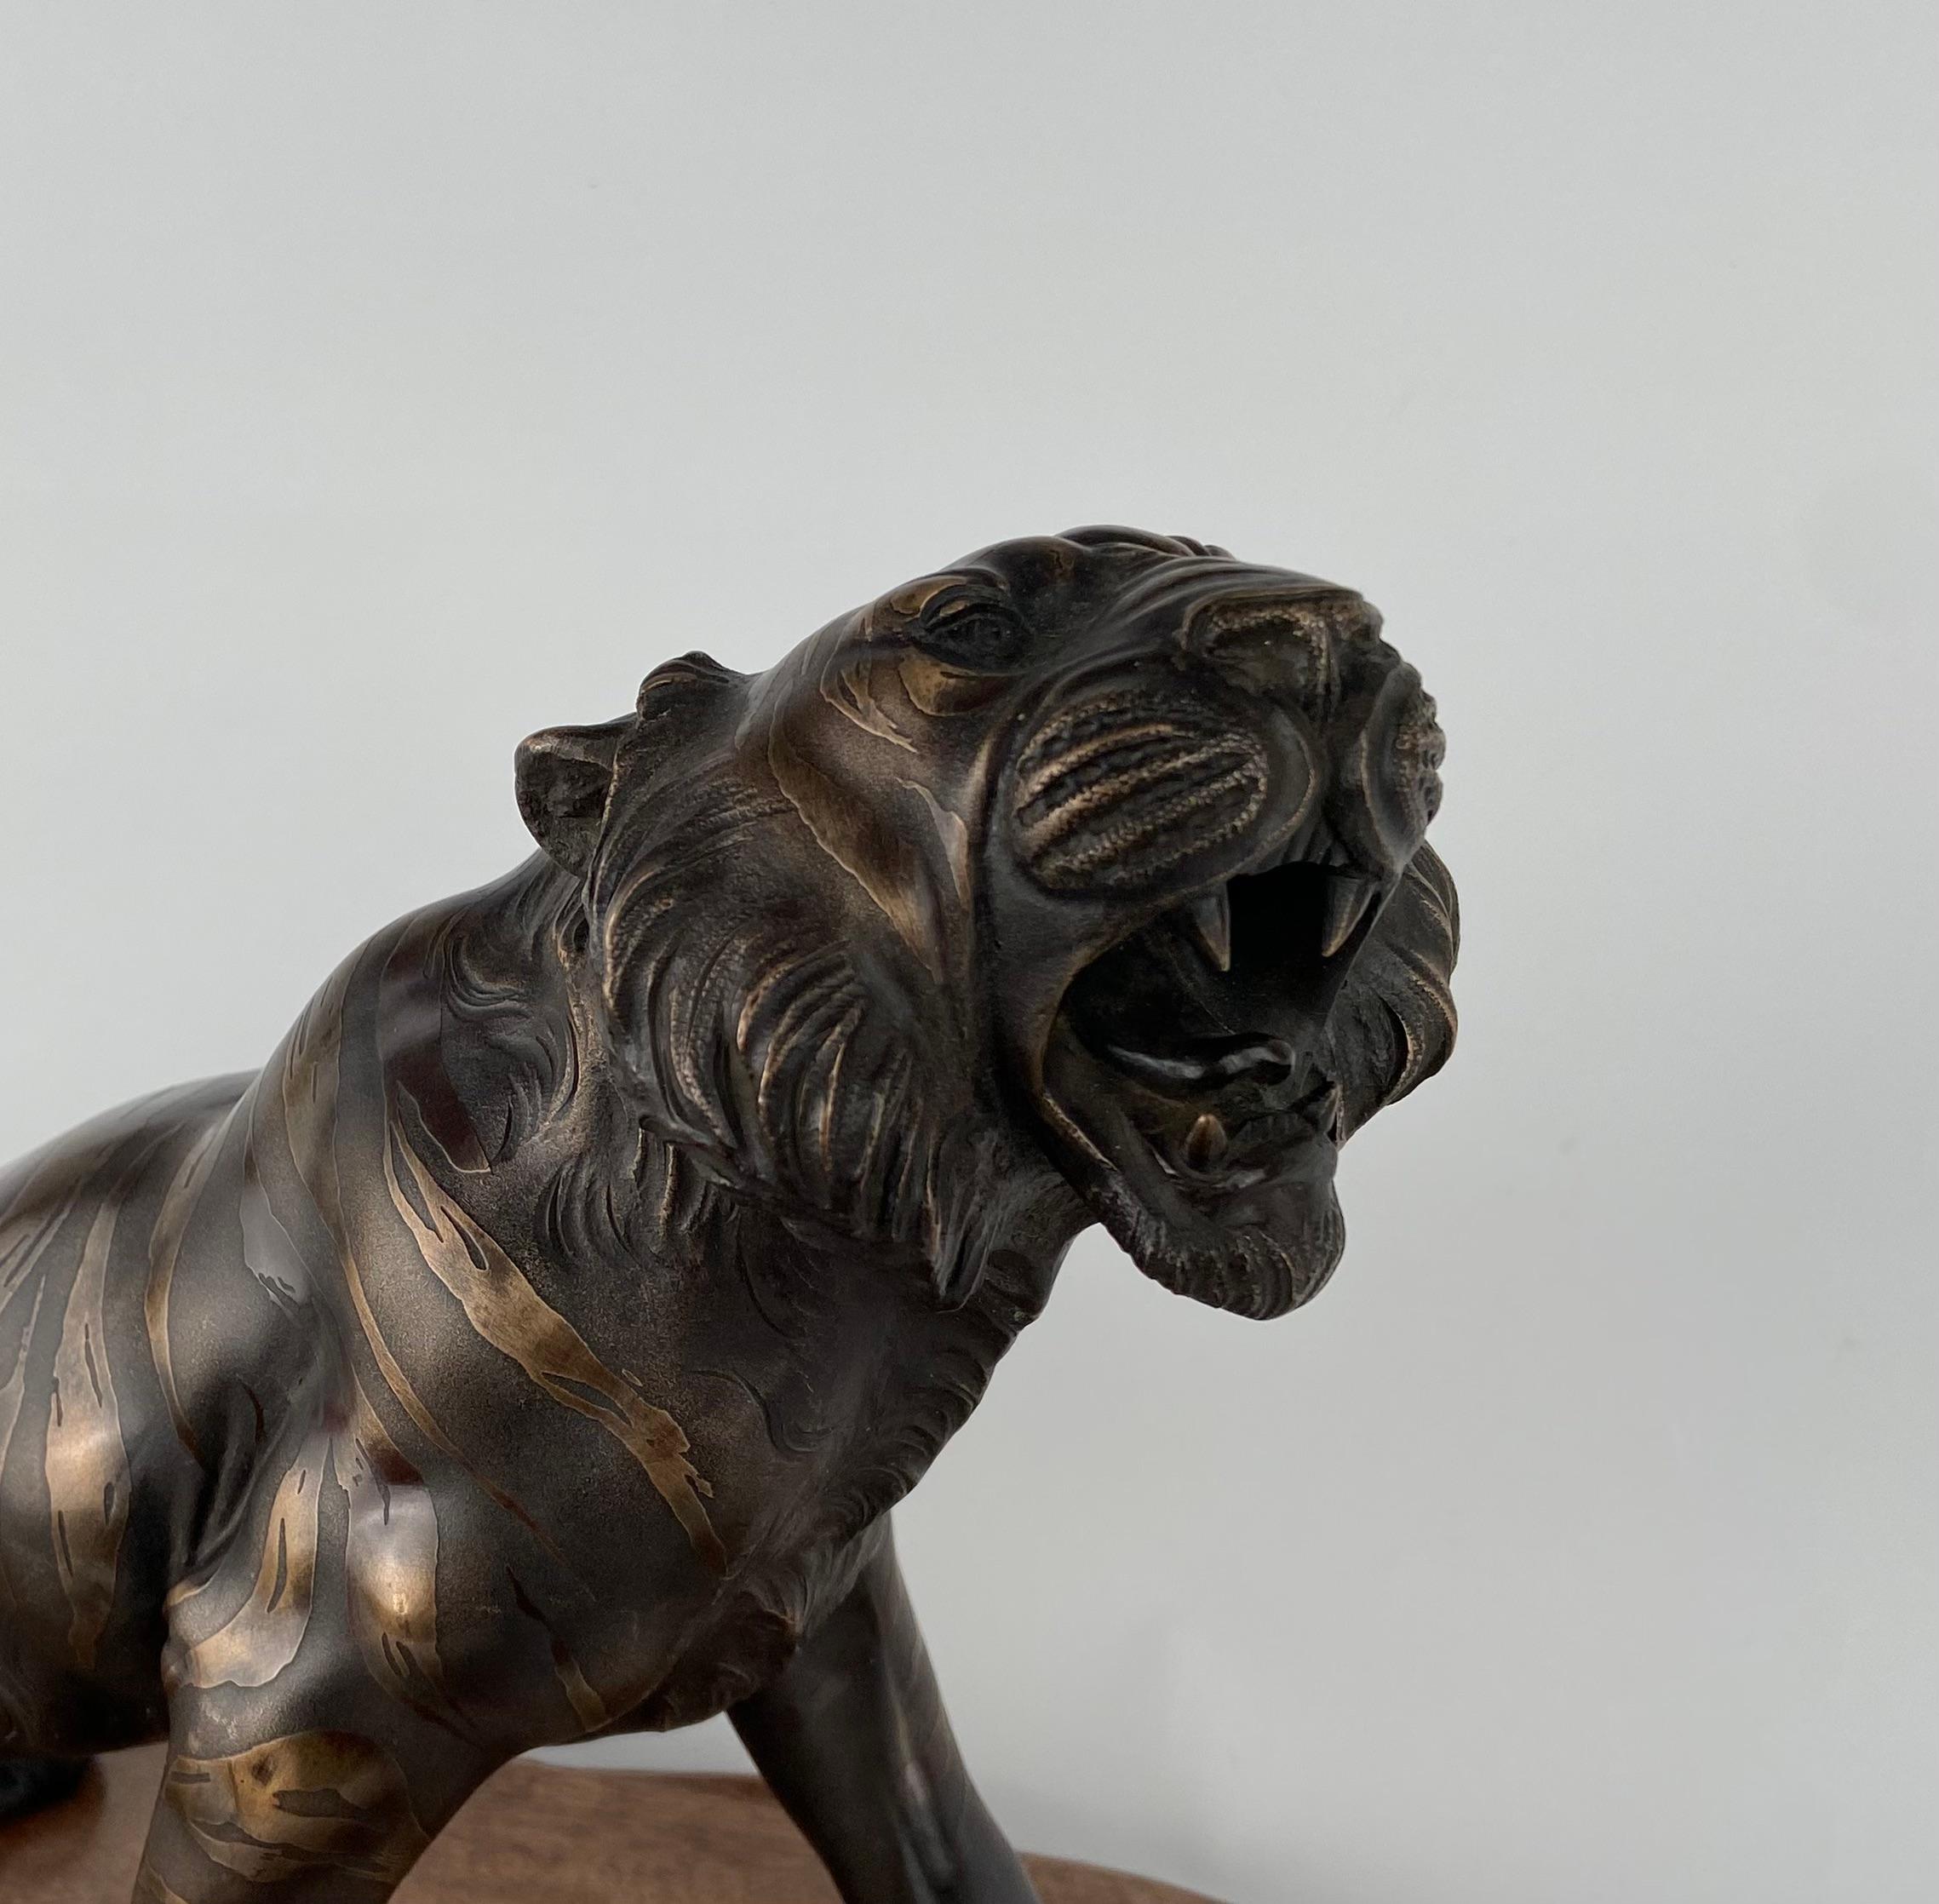 Japanese tiger in bronze on a wooden base, circa 1920.
Meiji periode.